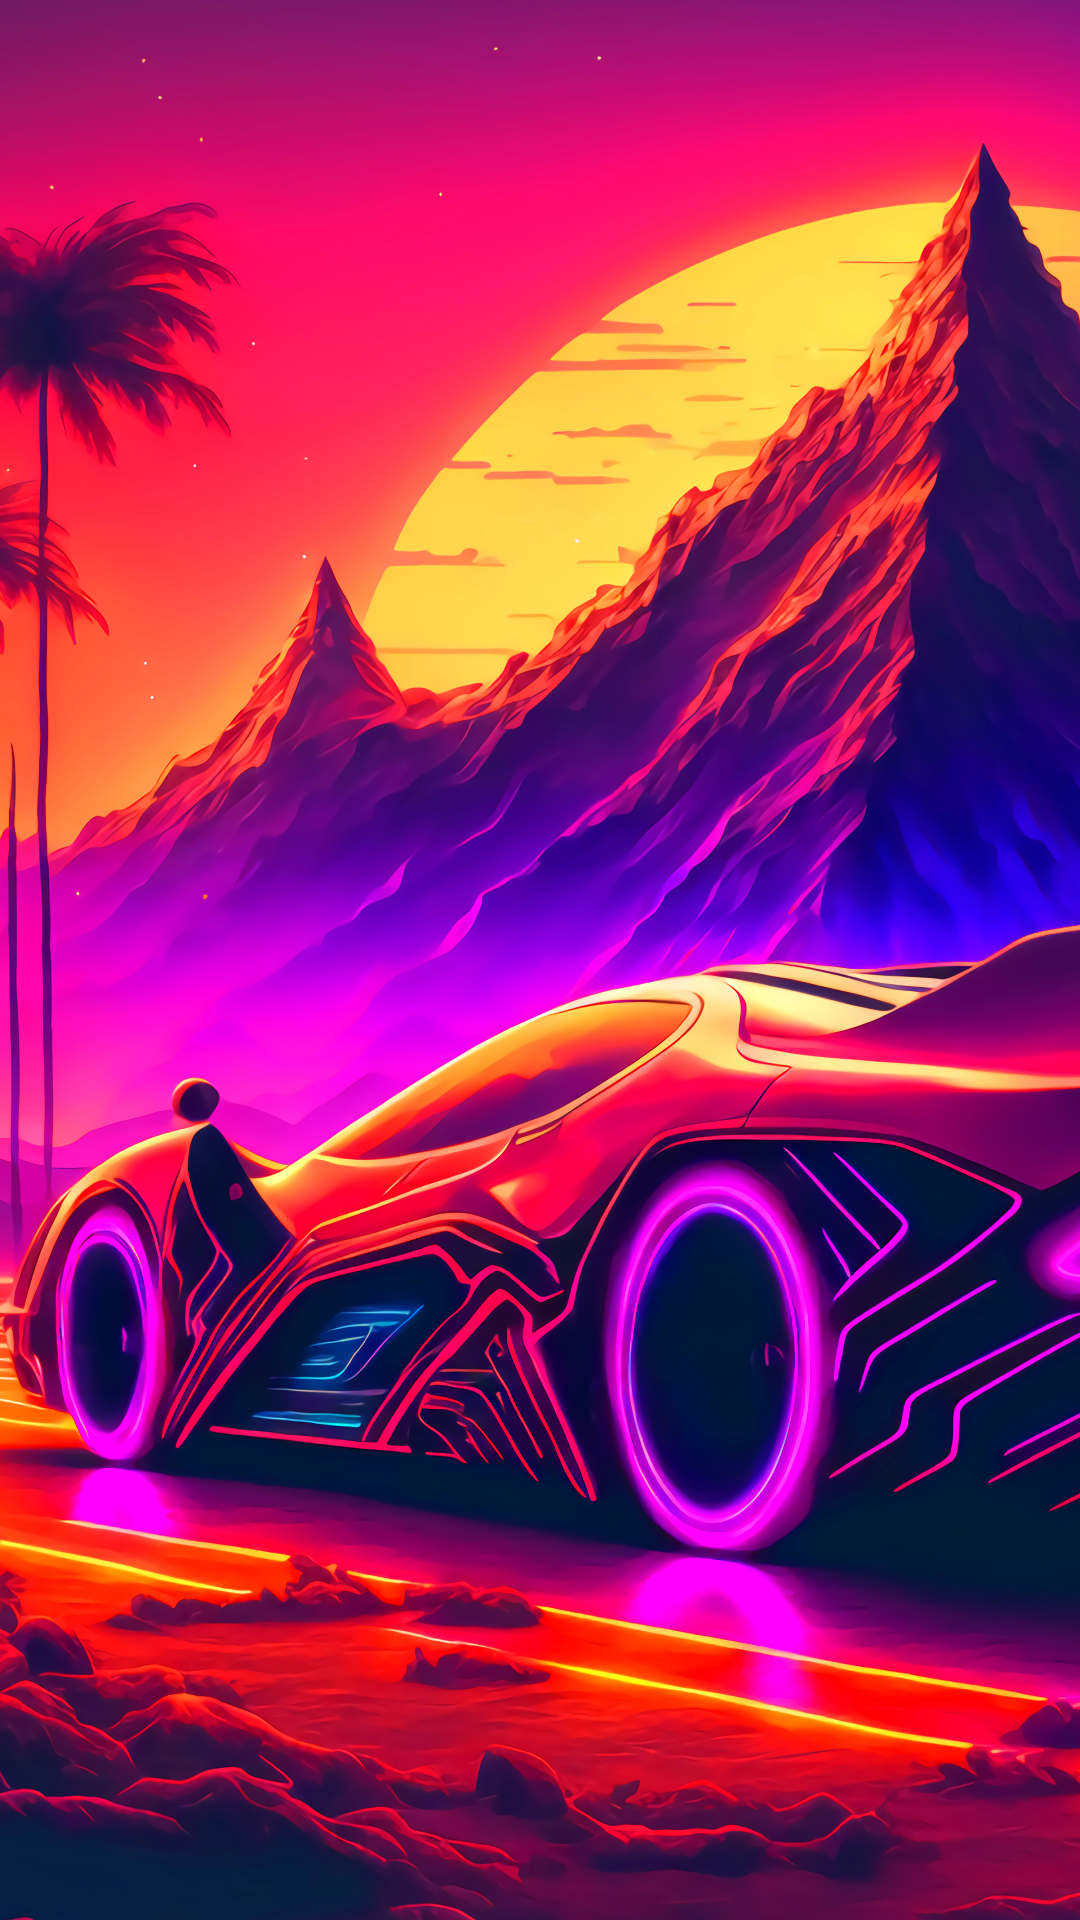 Artistic Synthwave Phone Wallpaper